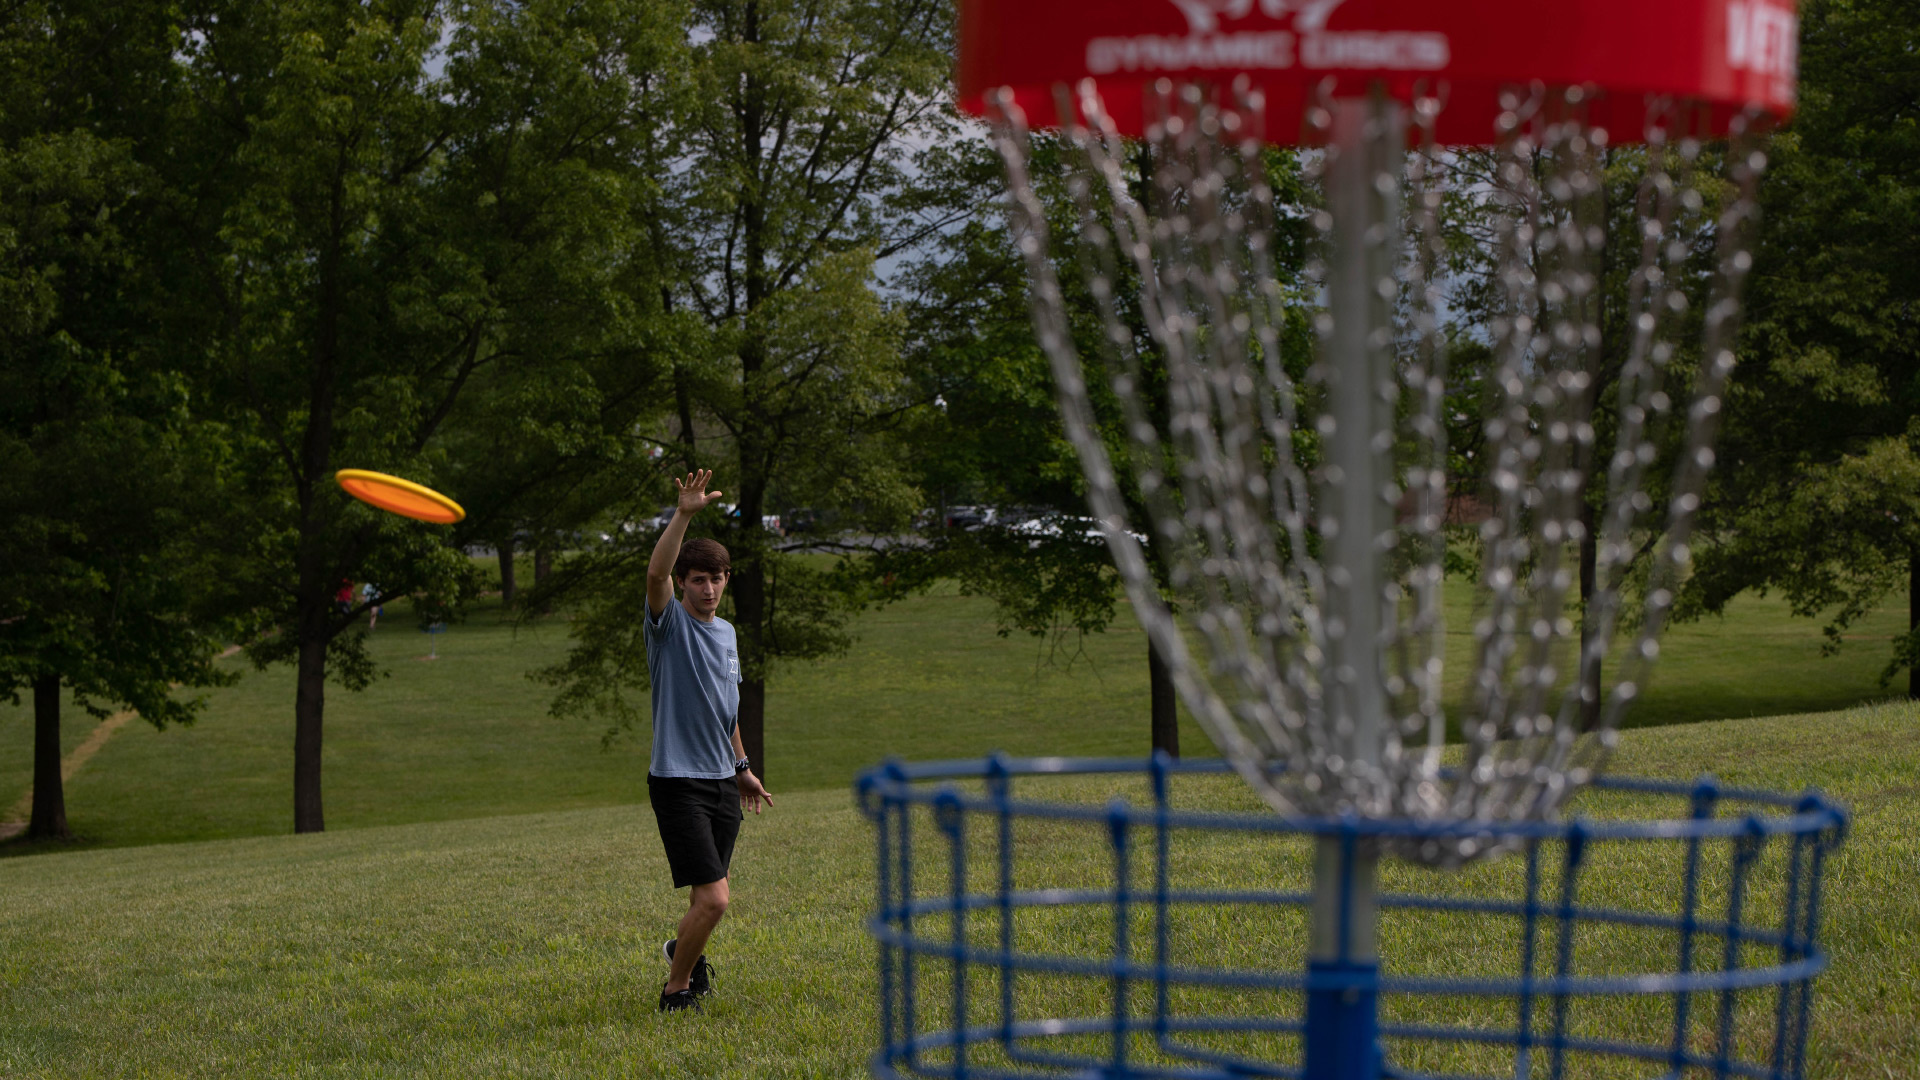 Flying Disc Sports: Disc Golf Course, Hanover College, New Hanover County Disc Golf Club. 1920x1080 Full HD Wallpaper.